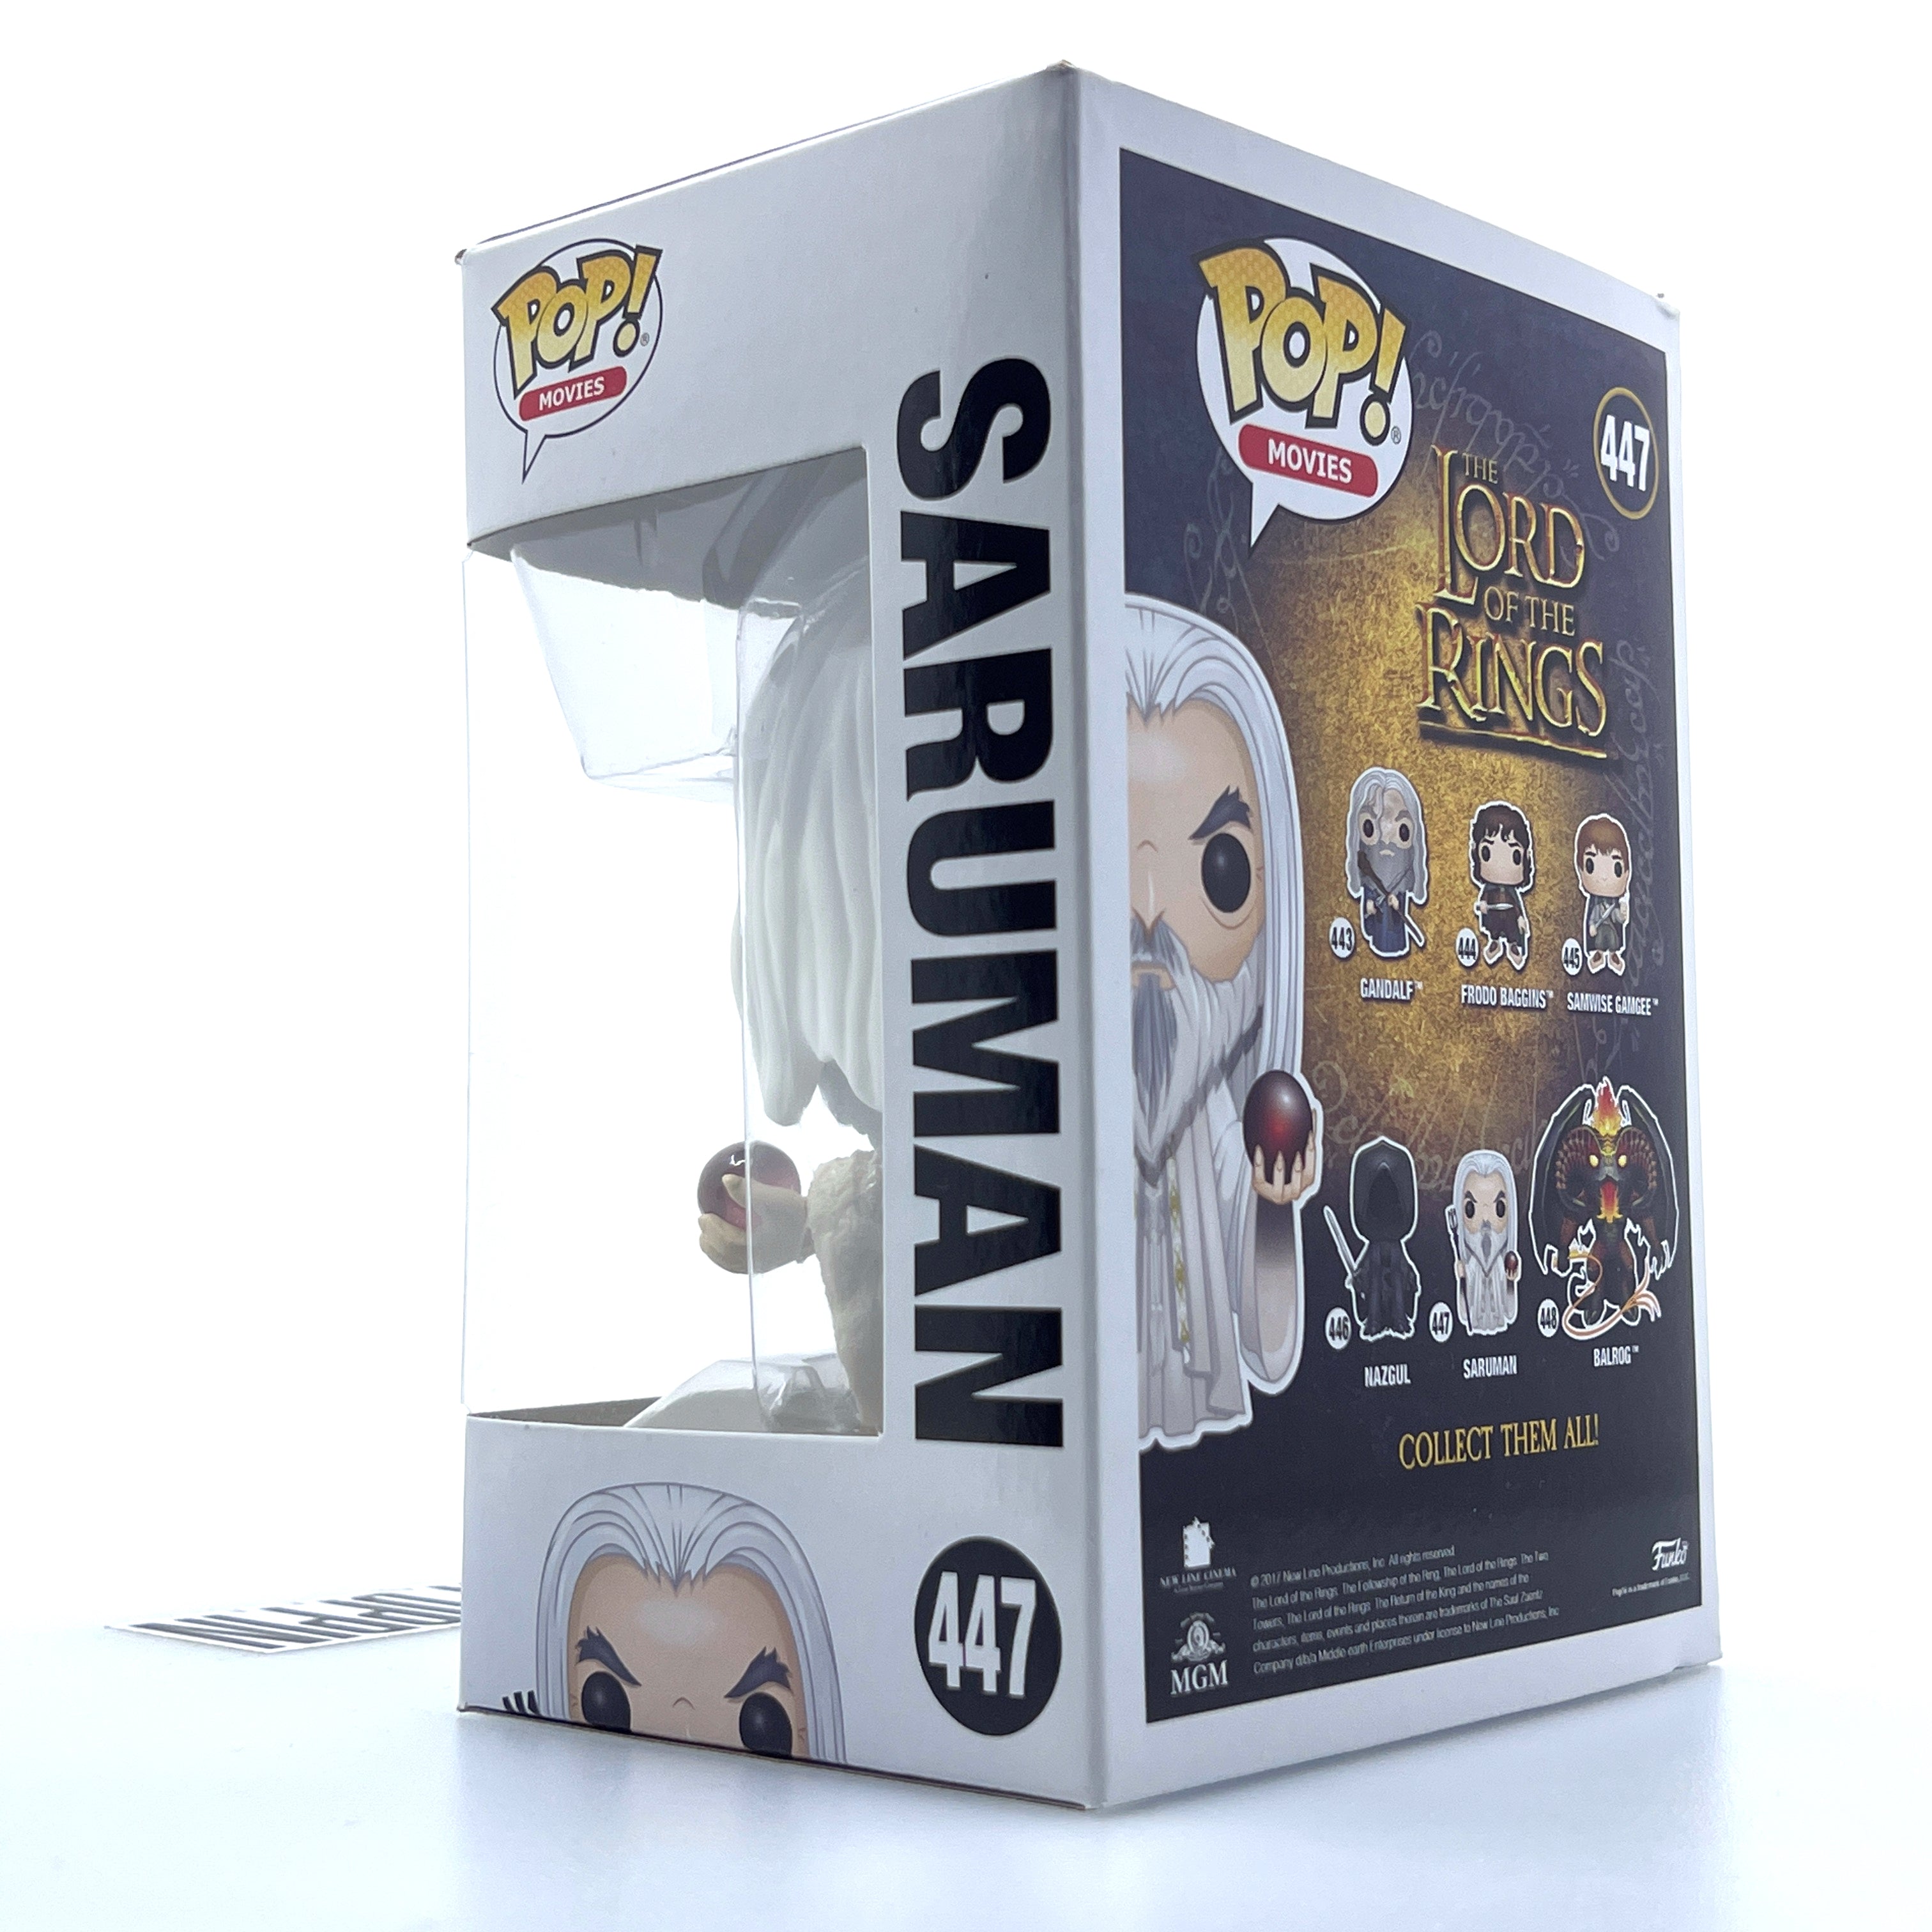 Funko Pop Movies The Lord of the Rings Saruman Vaulted 447